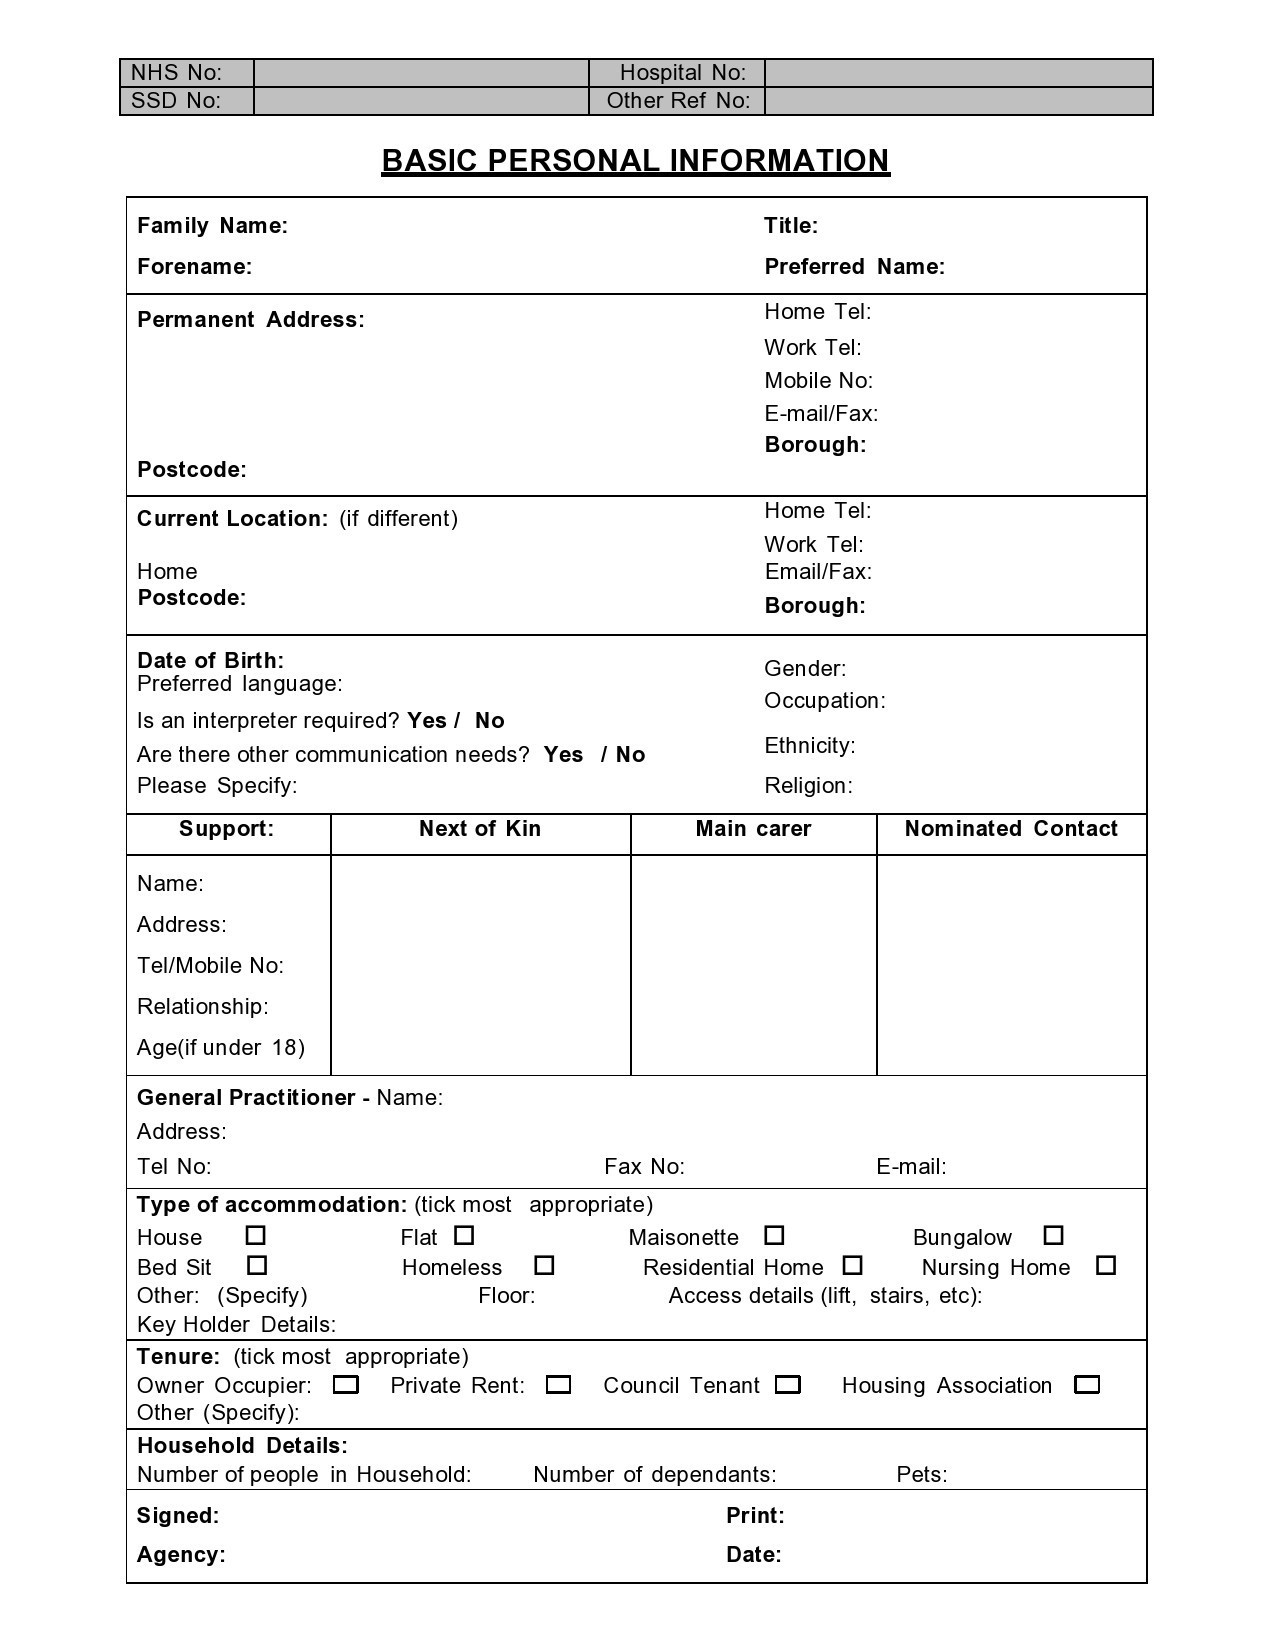 Free personal information form 08